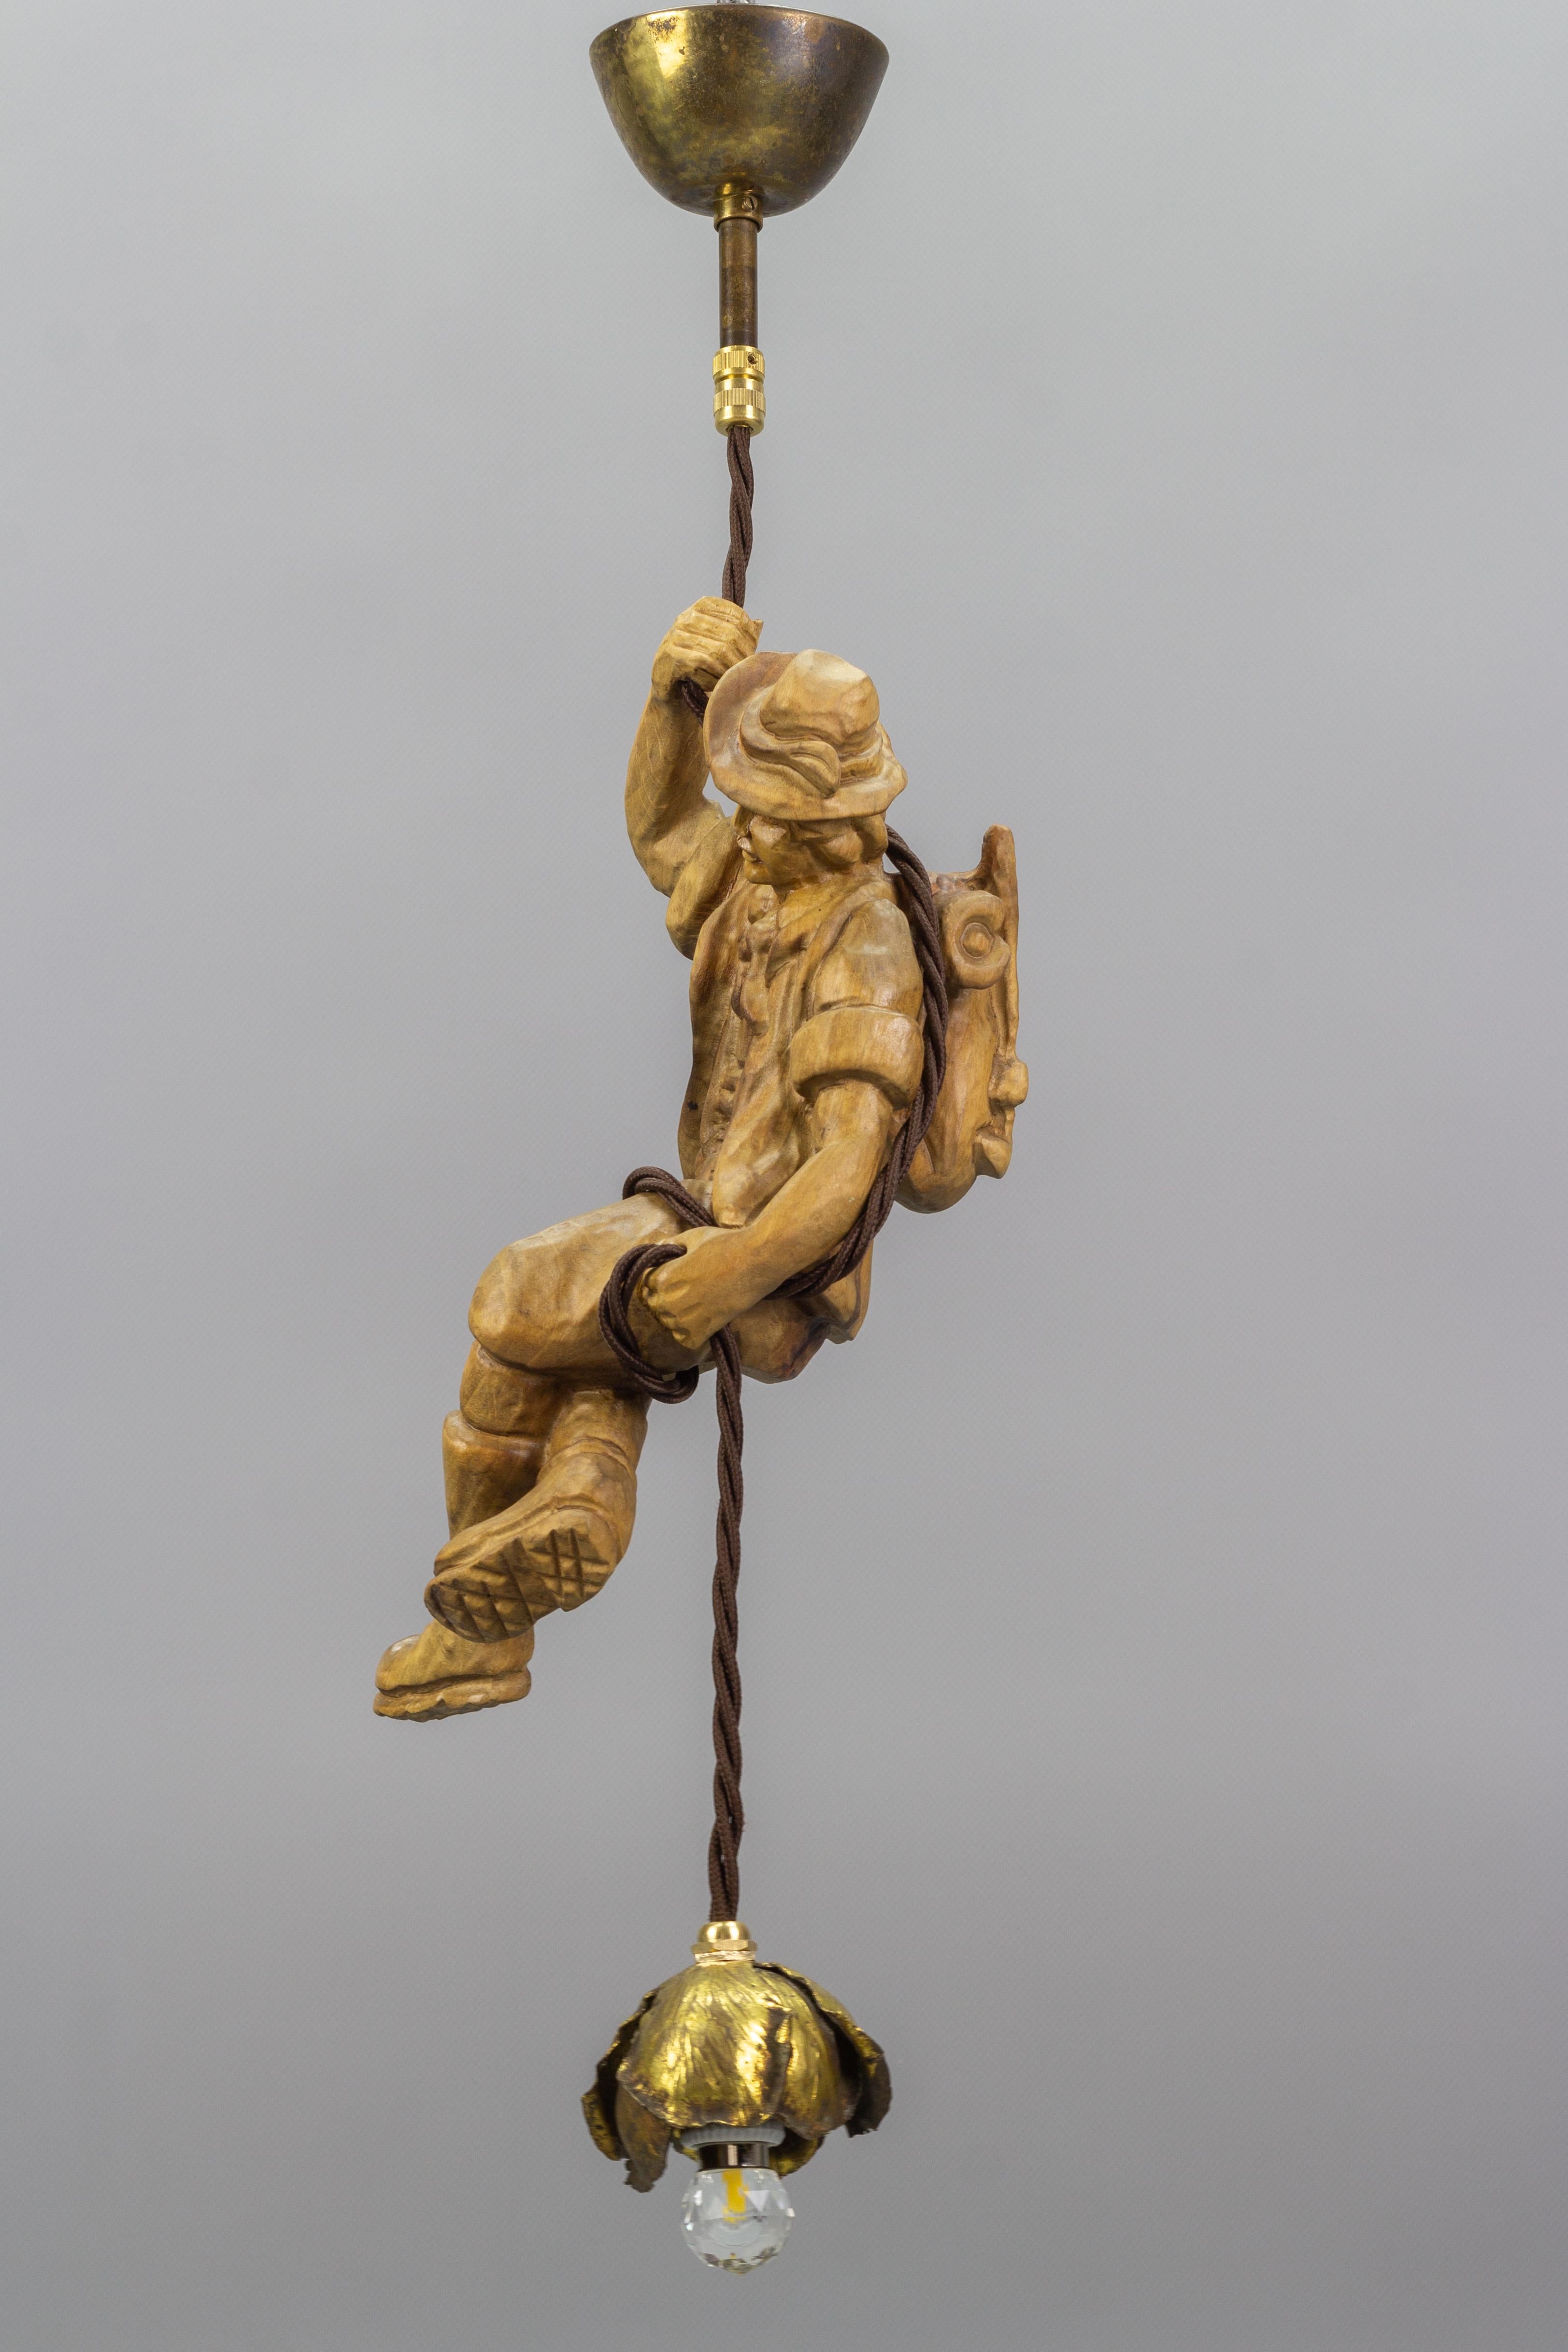 Hand-Carved Hanging Brass Light Fixture with a Wooden Figure of a Mountain Climber For Sale